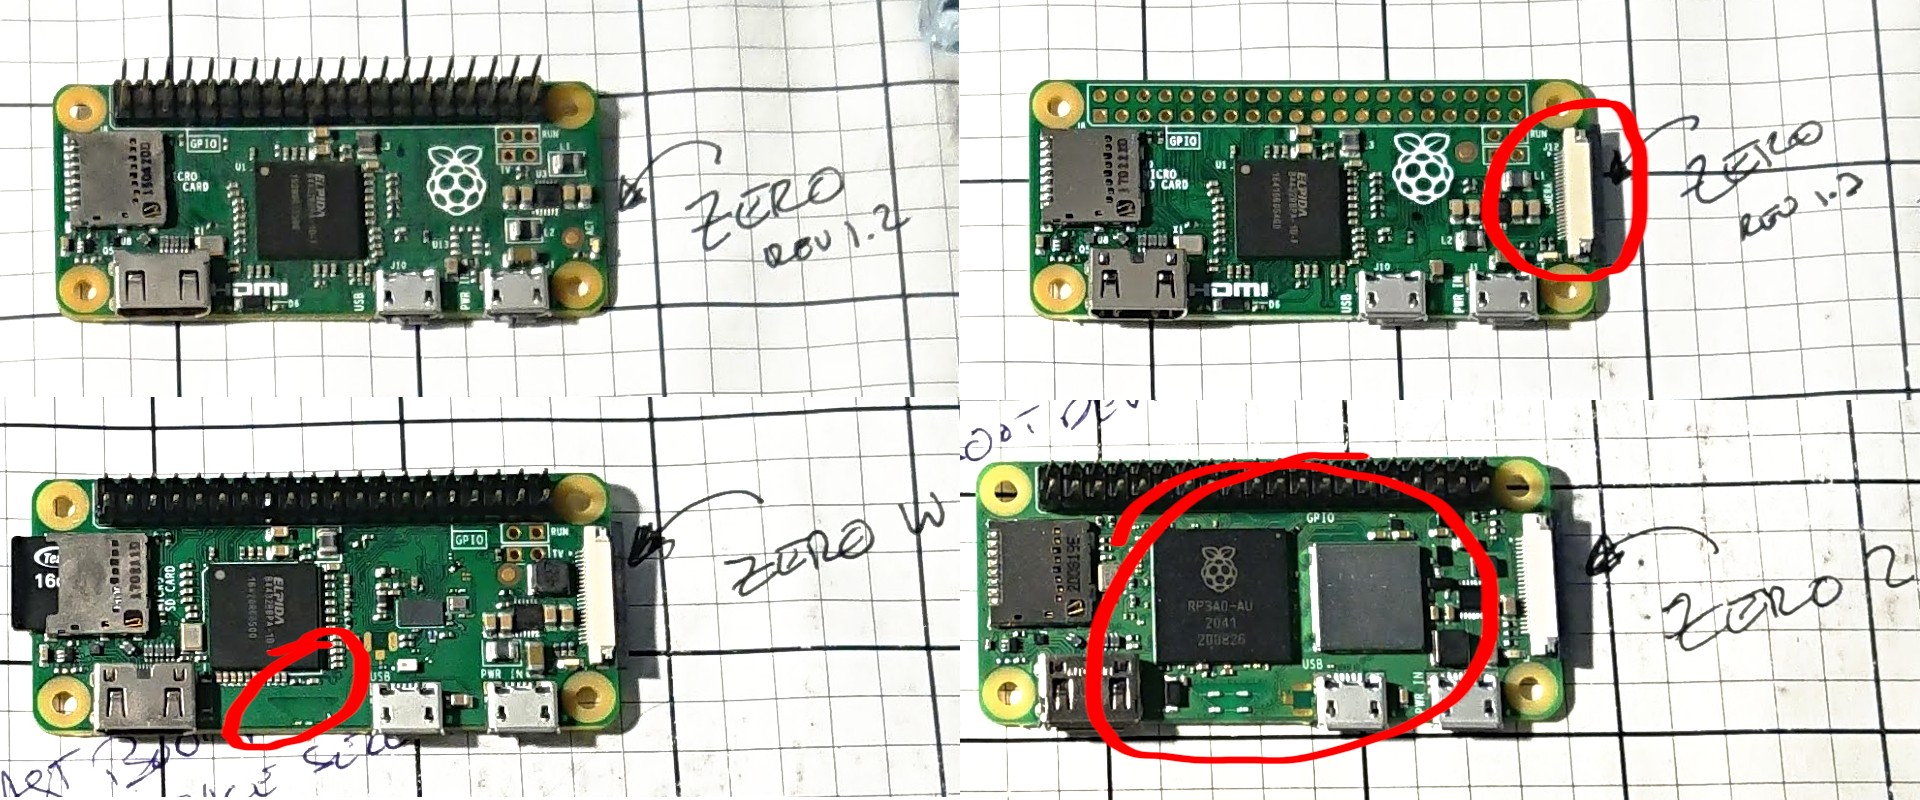 The original Pi Zero (top left), the Pi Zero rev 1.3 (top right) with added camera interface, the Pi Zero W (bottom left) with added WiFi and Bluetooth antenna, and the Pi Zero 2 (bottom right) with new SoC